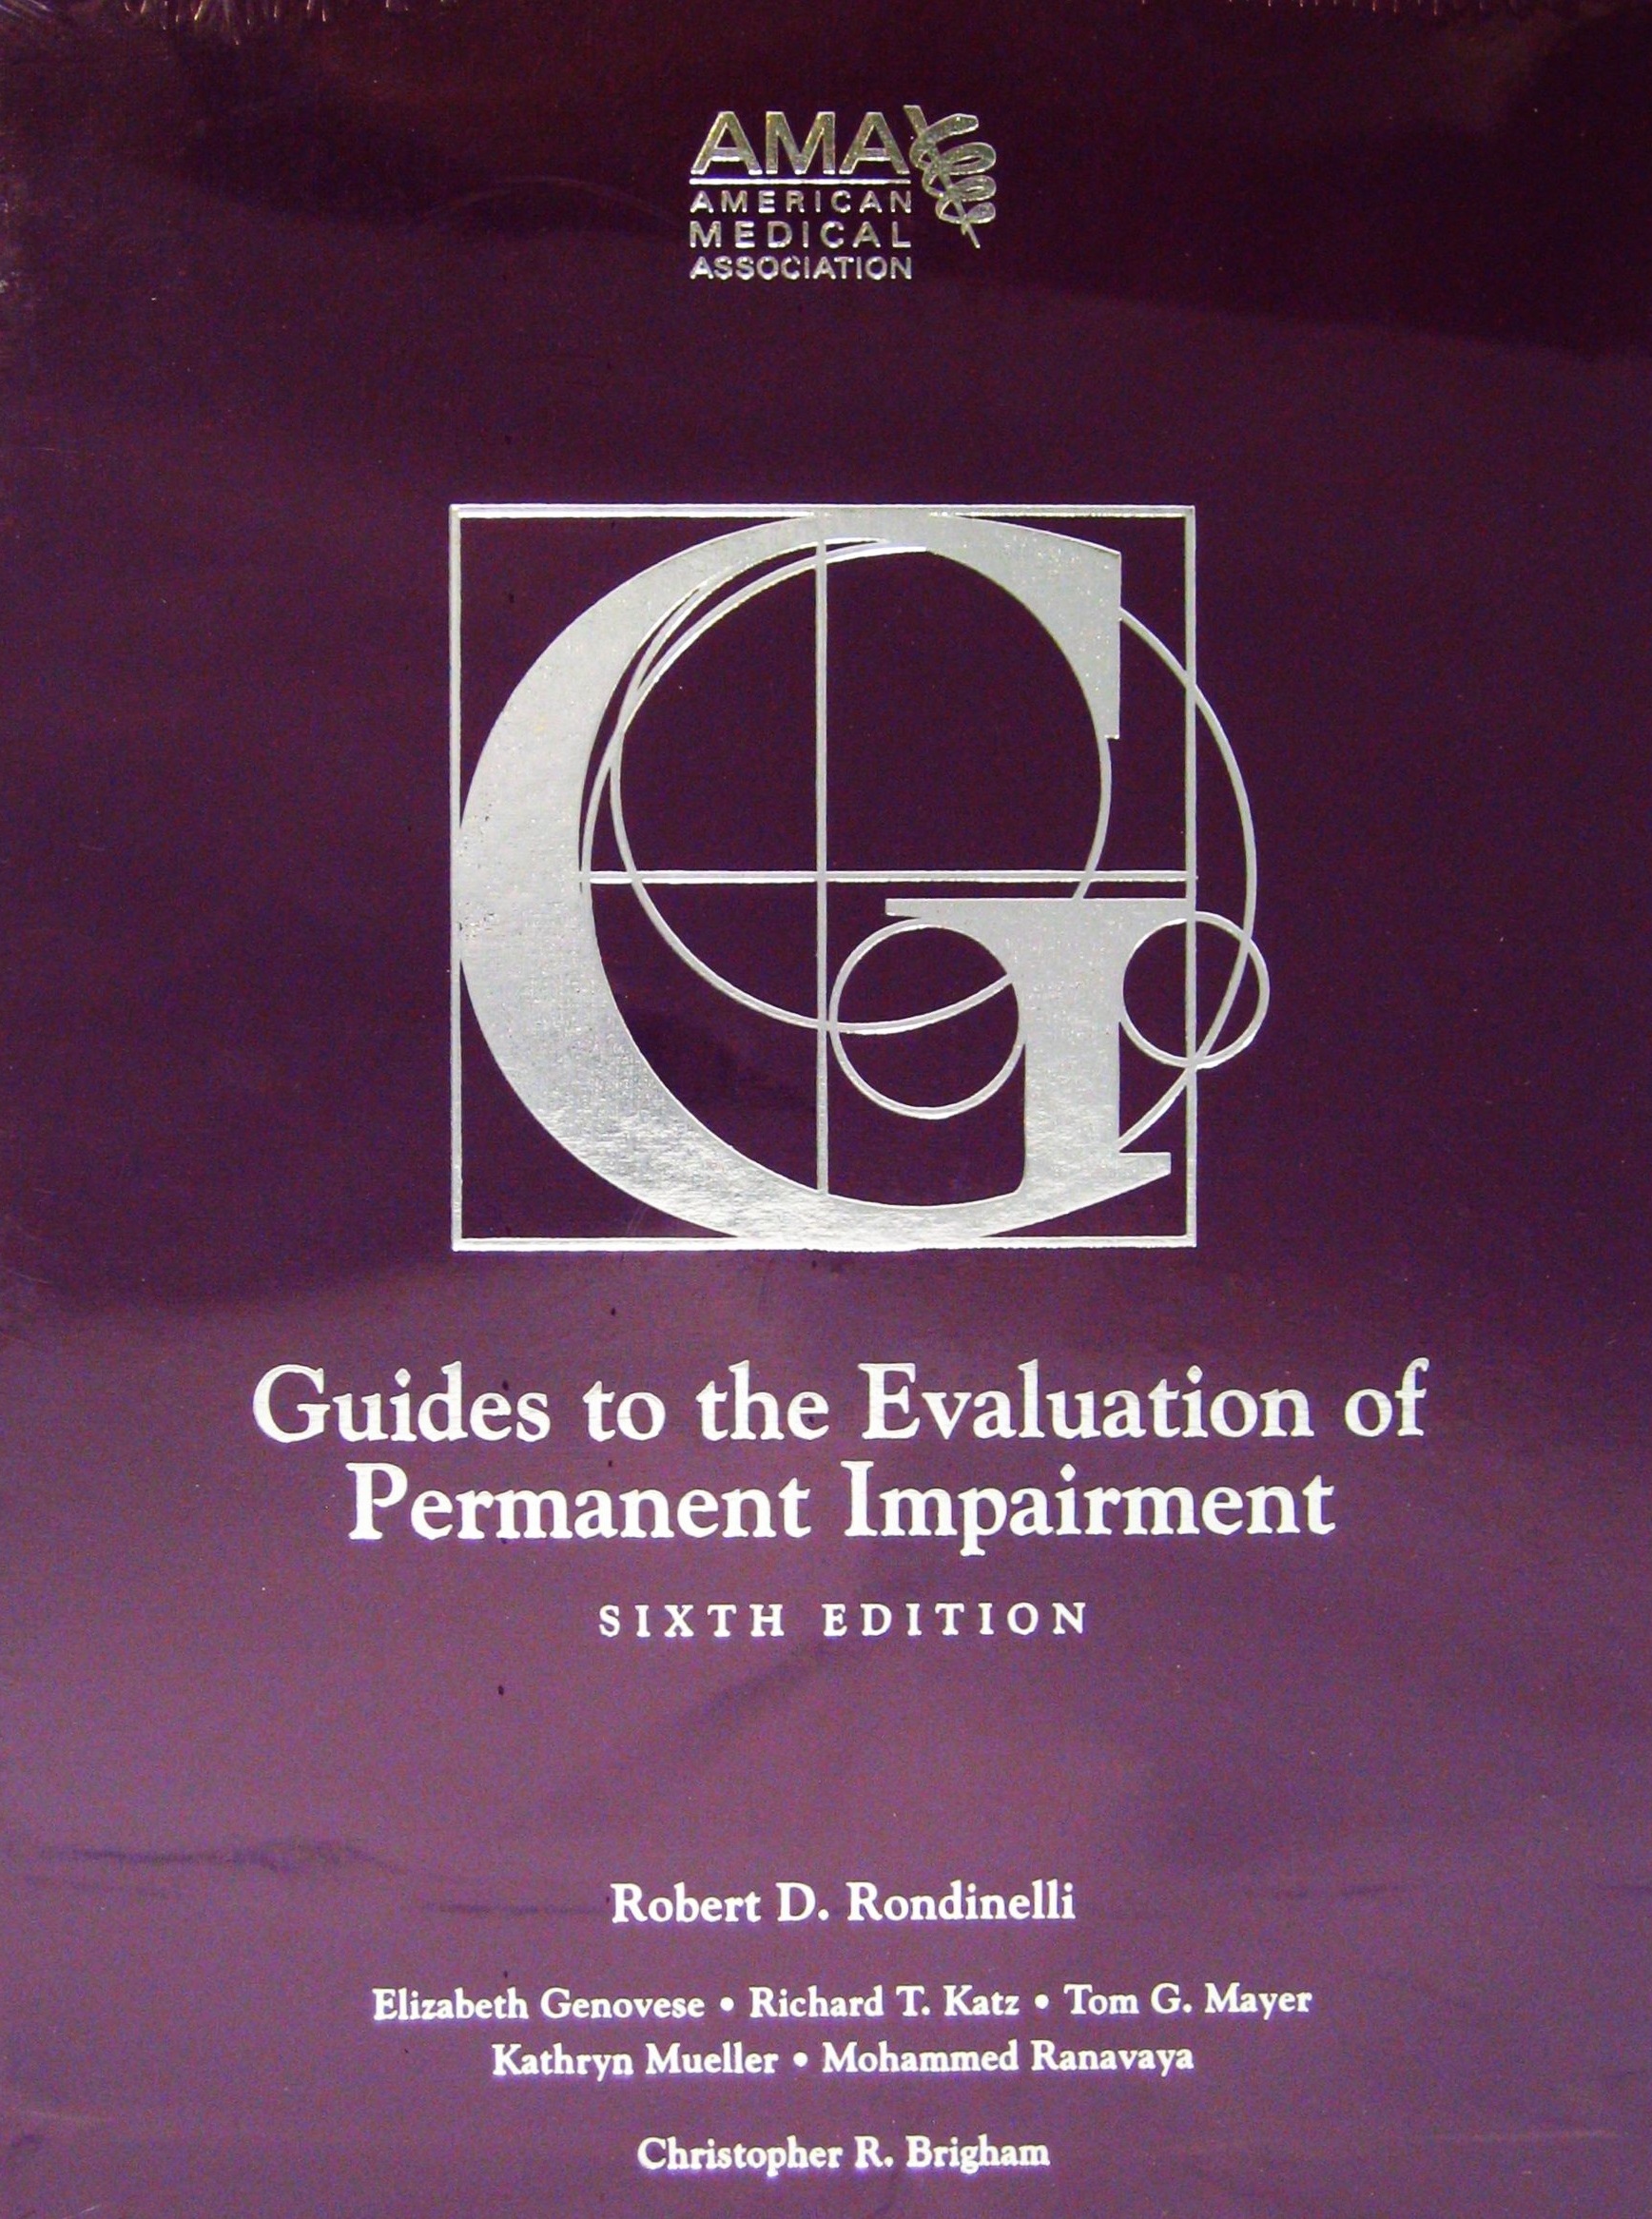 Guides to the Evaluation of Permanent Impairment (6th ed)